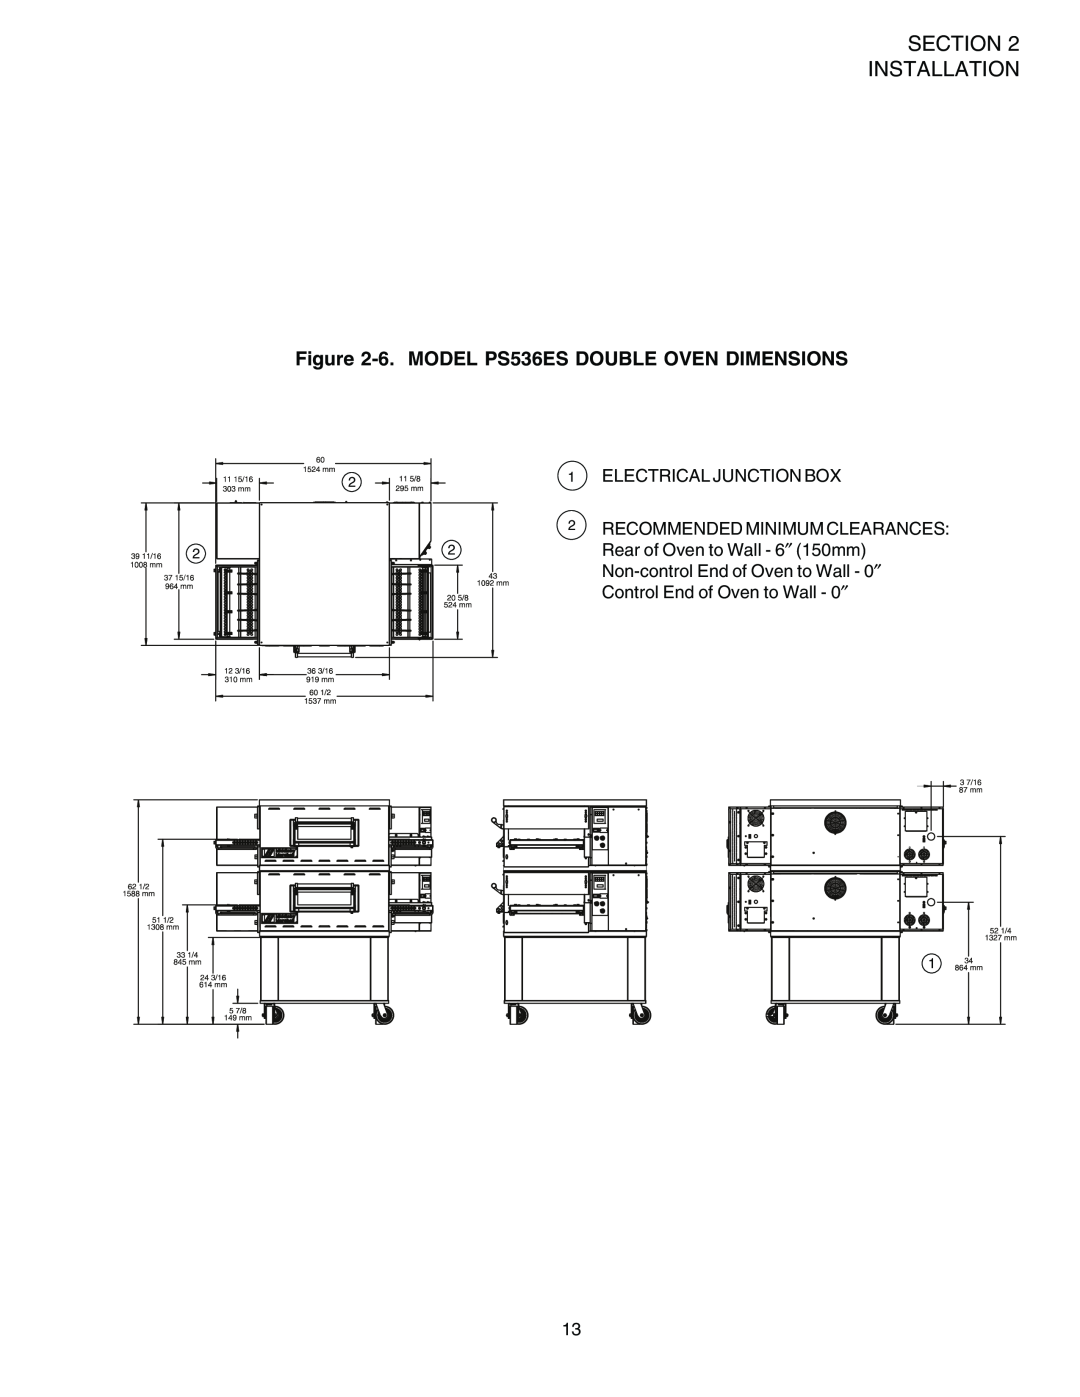 Middleby Marshall installation manual Installation, 6. MODEL PS536ES DOUBLE OVEN DIMENSIONS 